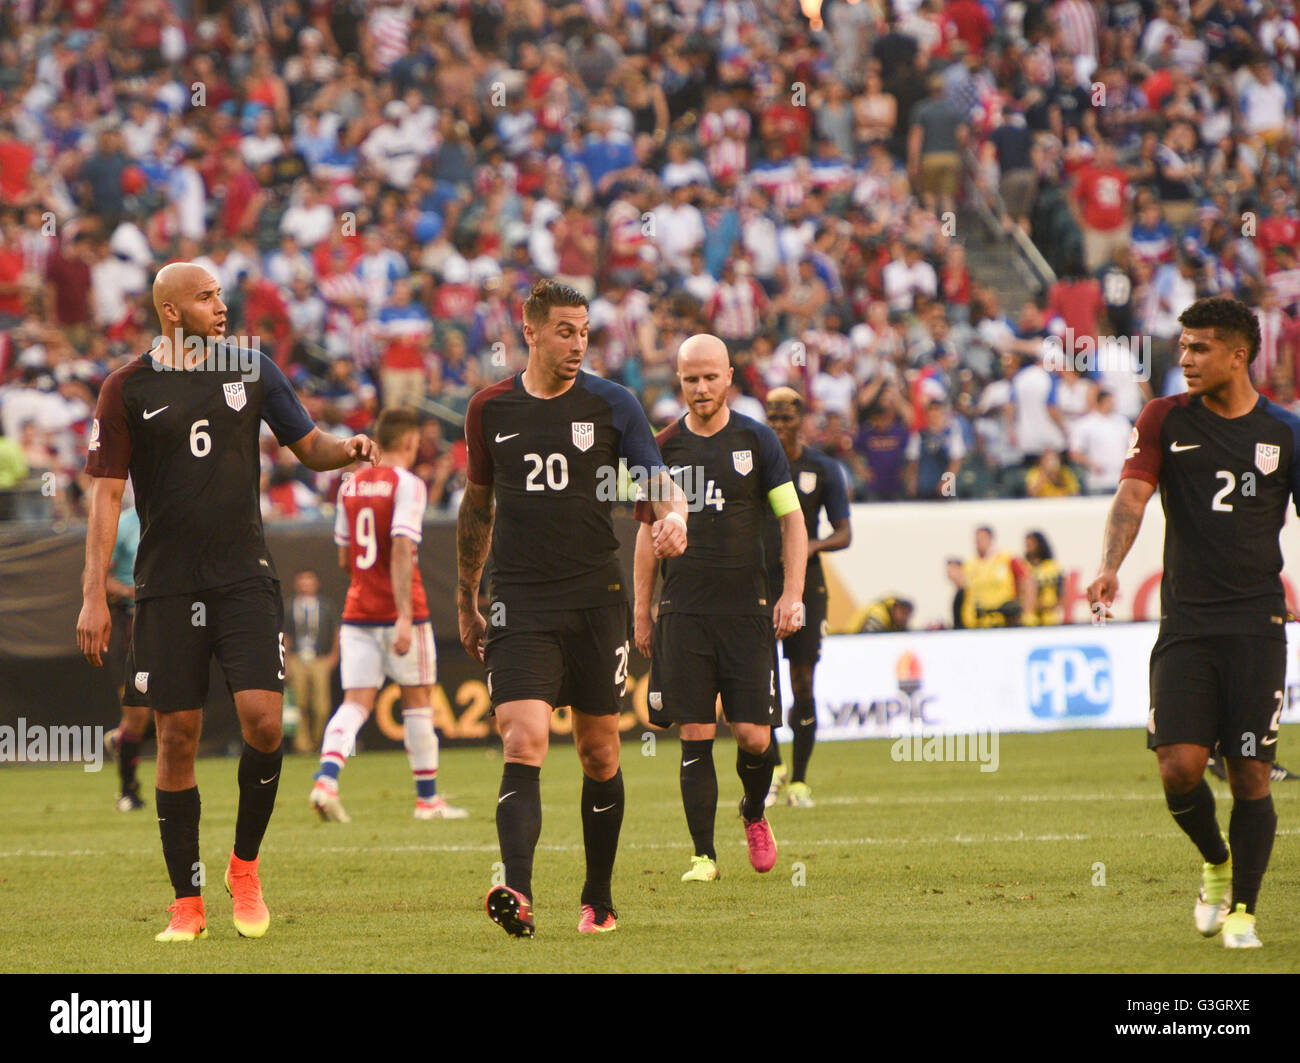 Philadelphia, Pennsylvania, USA. 11th June, 2016. JON BROOKS, GEOFF CAMERON, MICHAEL BRADLEY and DEANDRE YEDLIN of the USA walk off of the pitch during the Copa America match played at Lincoln Financial Field in Philadelphia Pa © Ricky Fitchett/ZUMA Wire/Alamy Live News Stock Photo